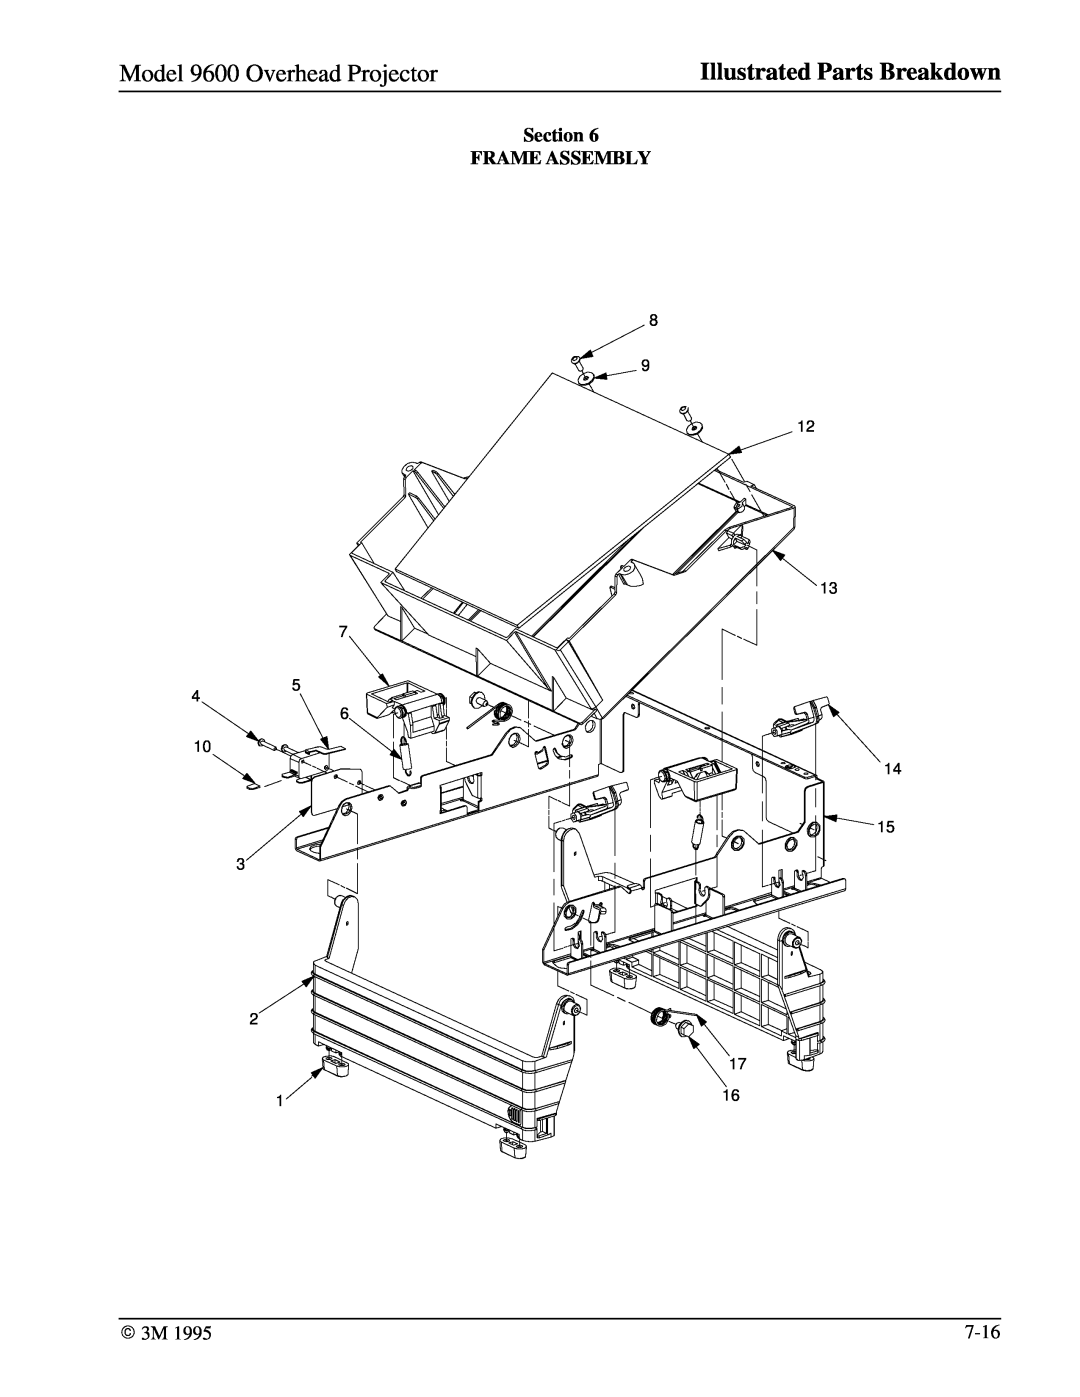 3M manual Section FRAME ASSEMBLY, Model 9600 Overhead Projector, Illustrated Parts Breakdown 